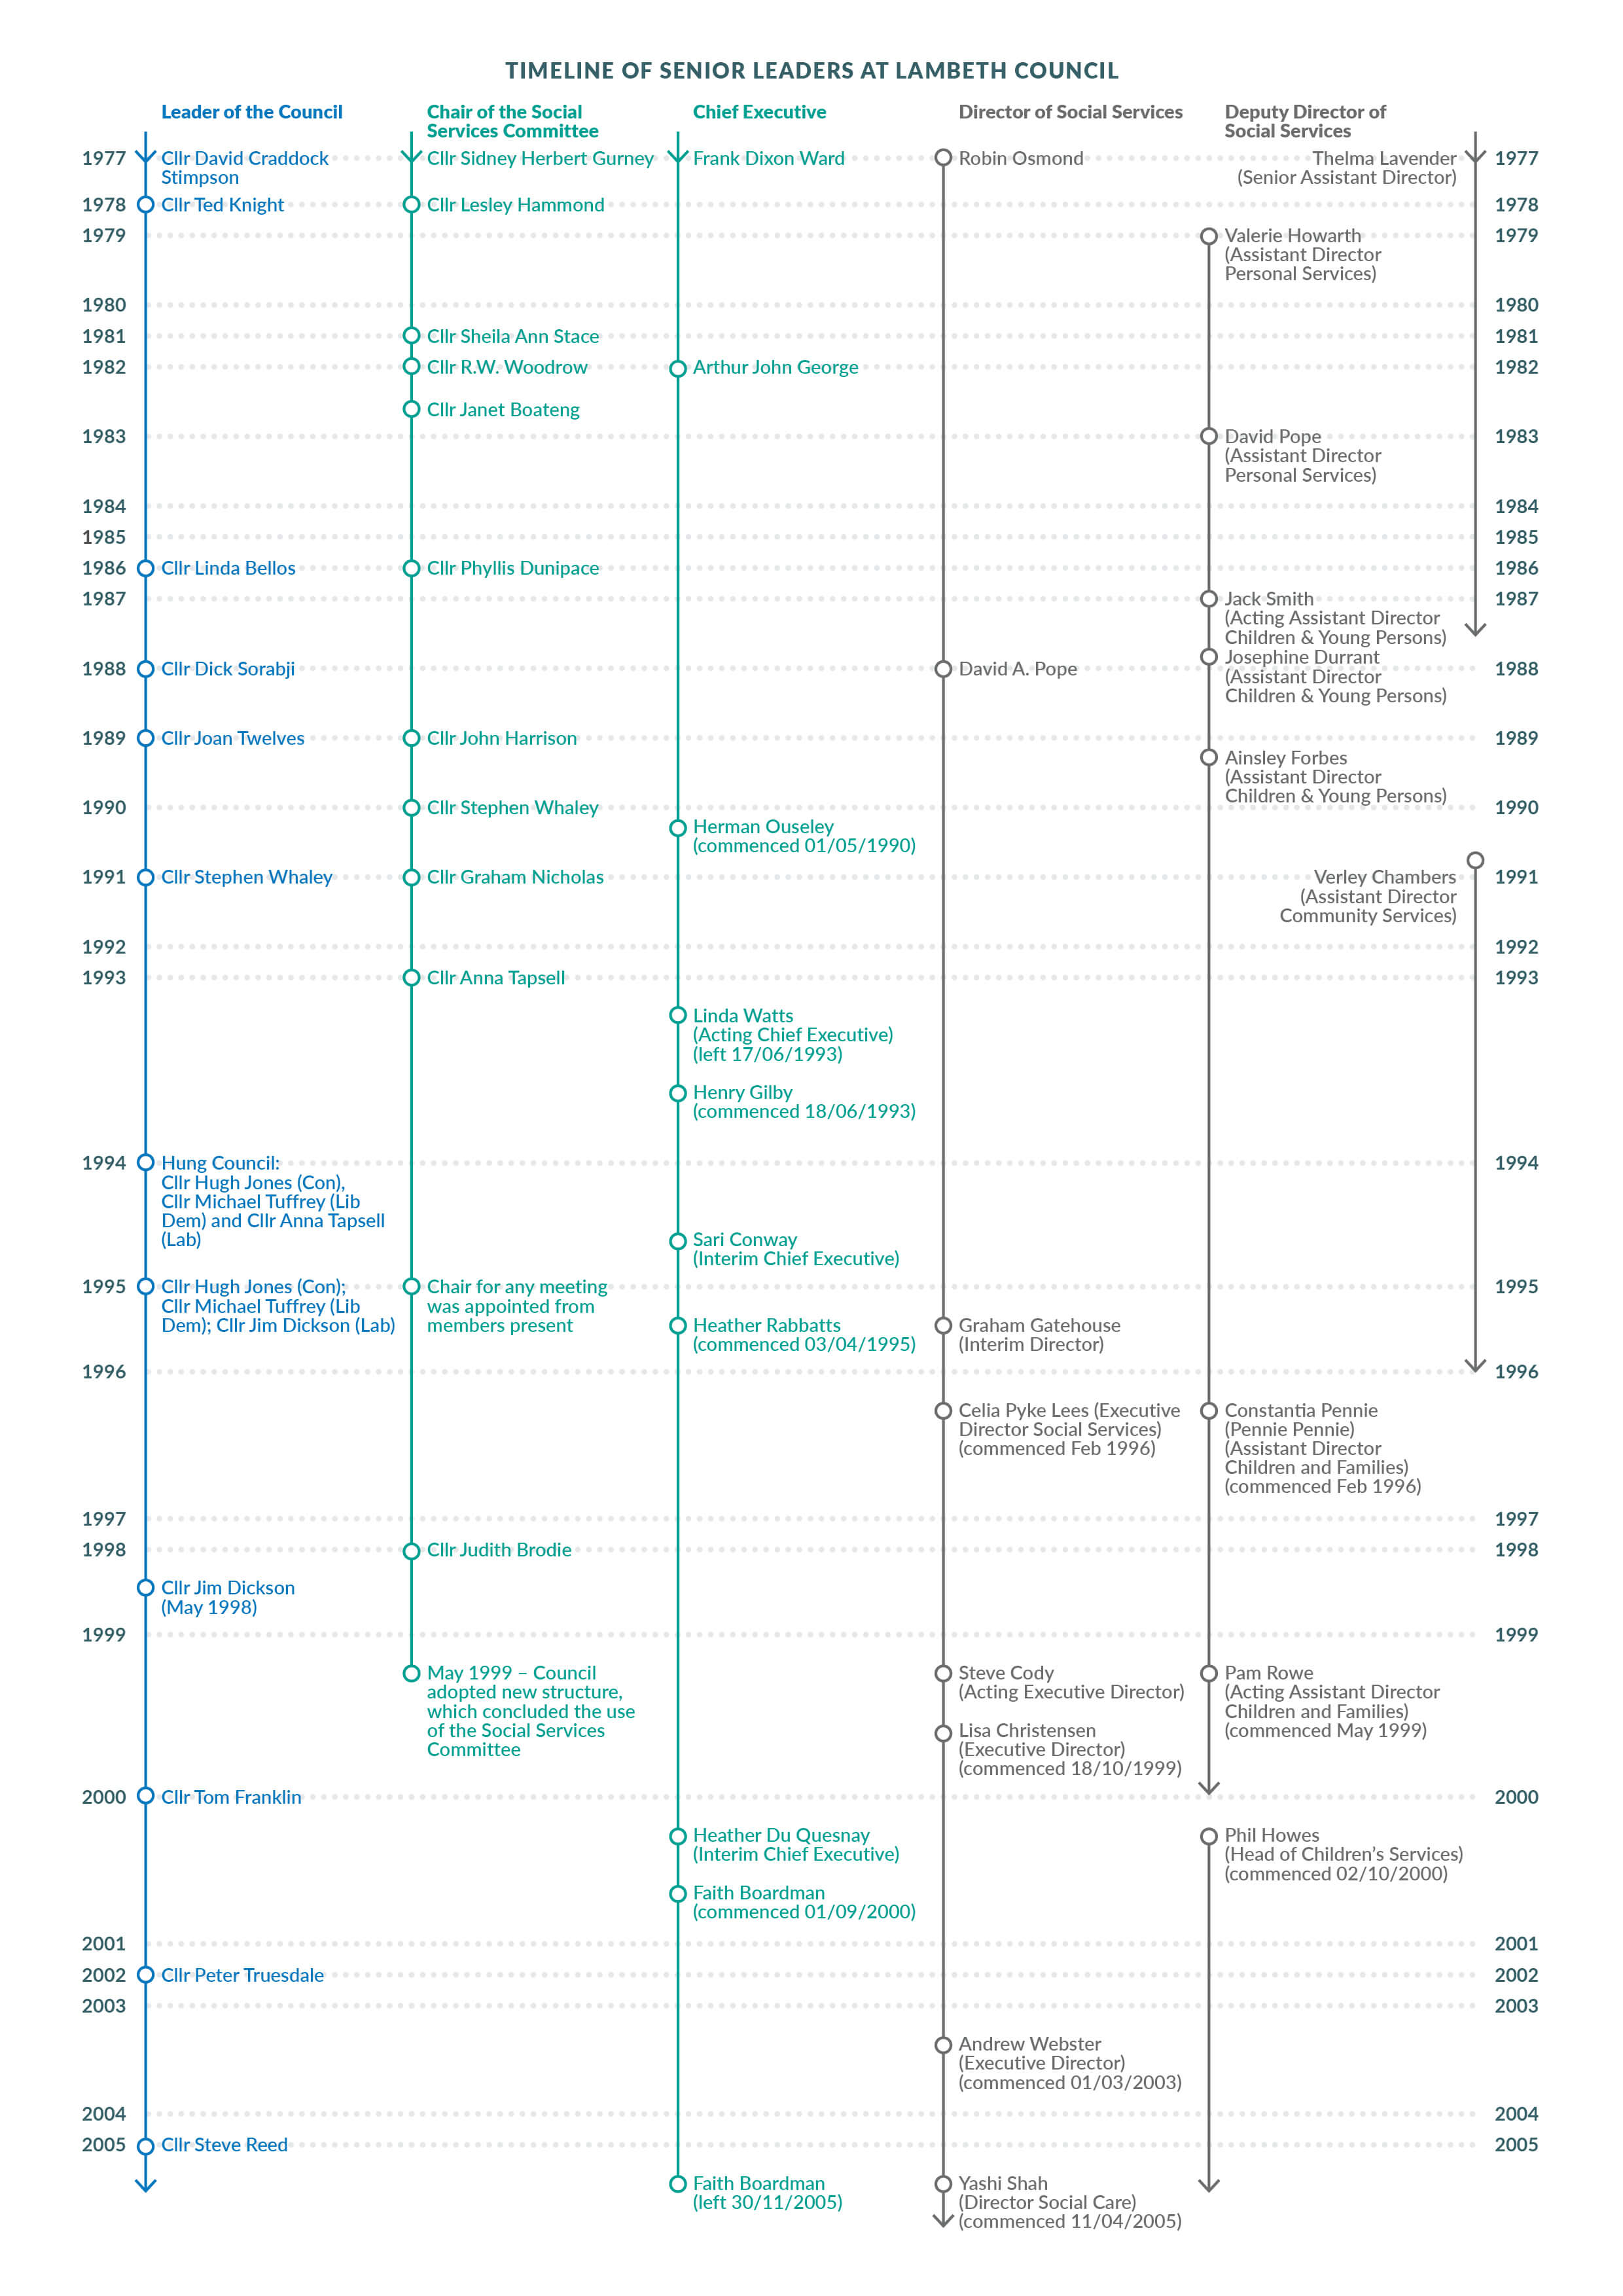 Timeline of senior leaders at Lambeth Council from 1977 until 2005. The timeline shows the positions of Leader of the council, Chair of the Social Services Committee, The Chief Executive, The Director of Social Services and The Deputy Director of Social Services